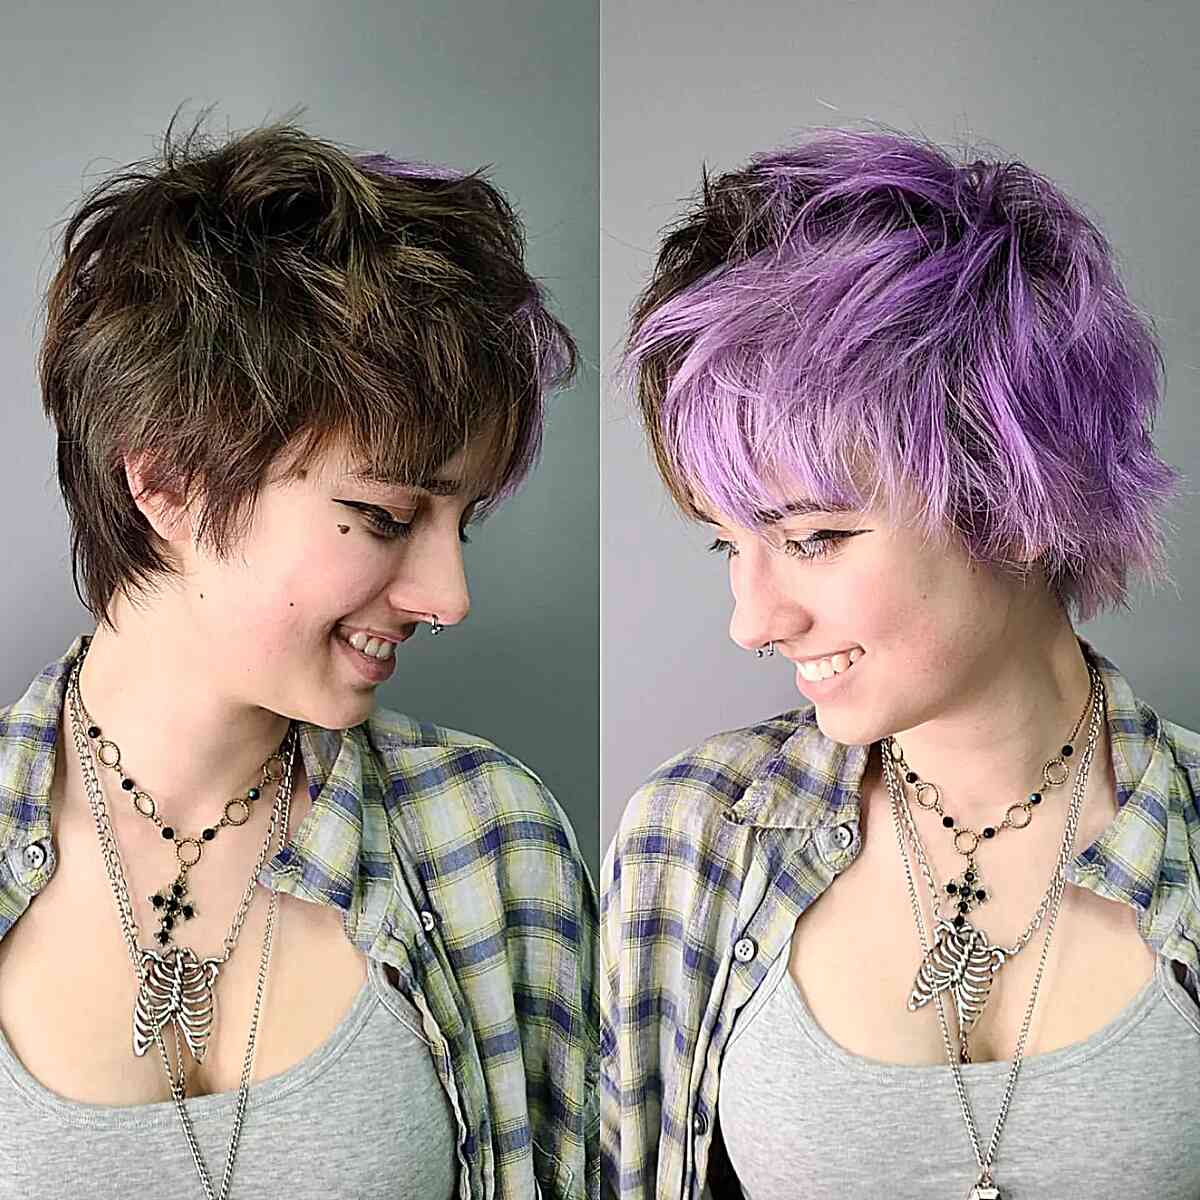 Short shaggy gemini hair color with two tone purple and brown